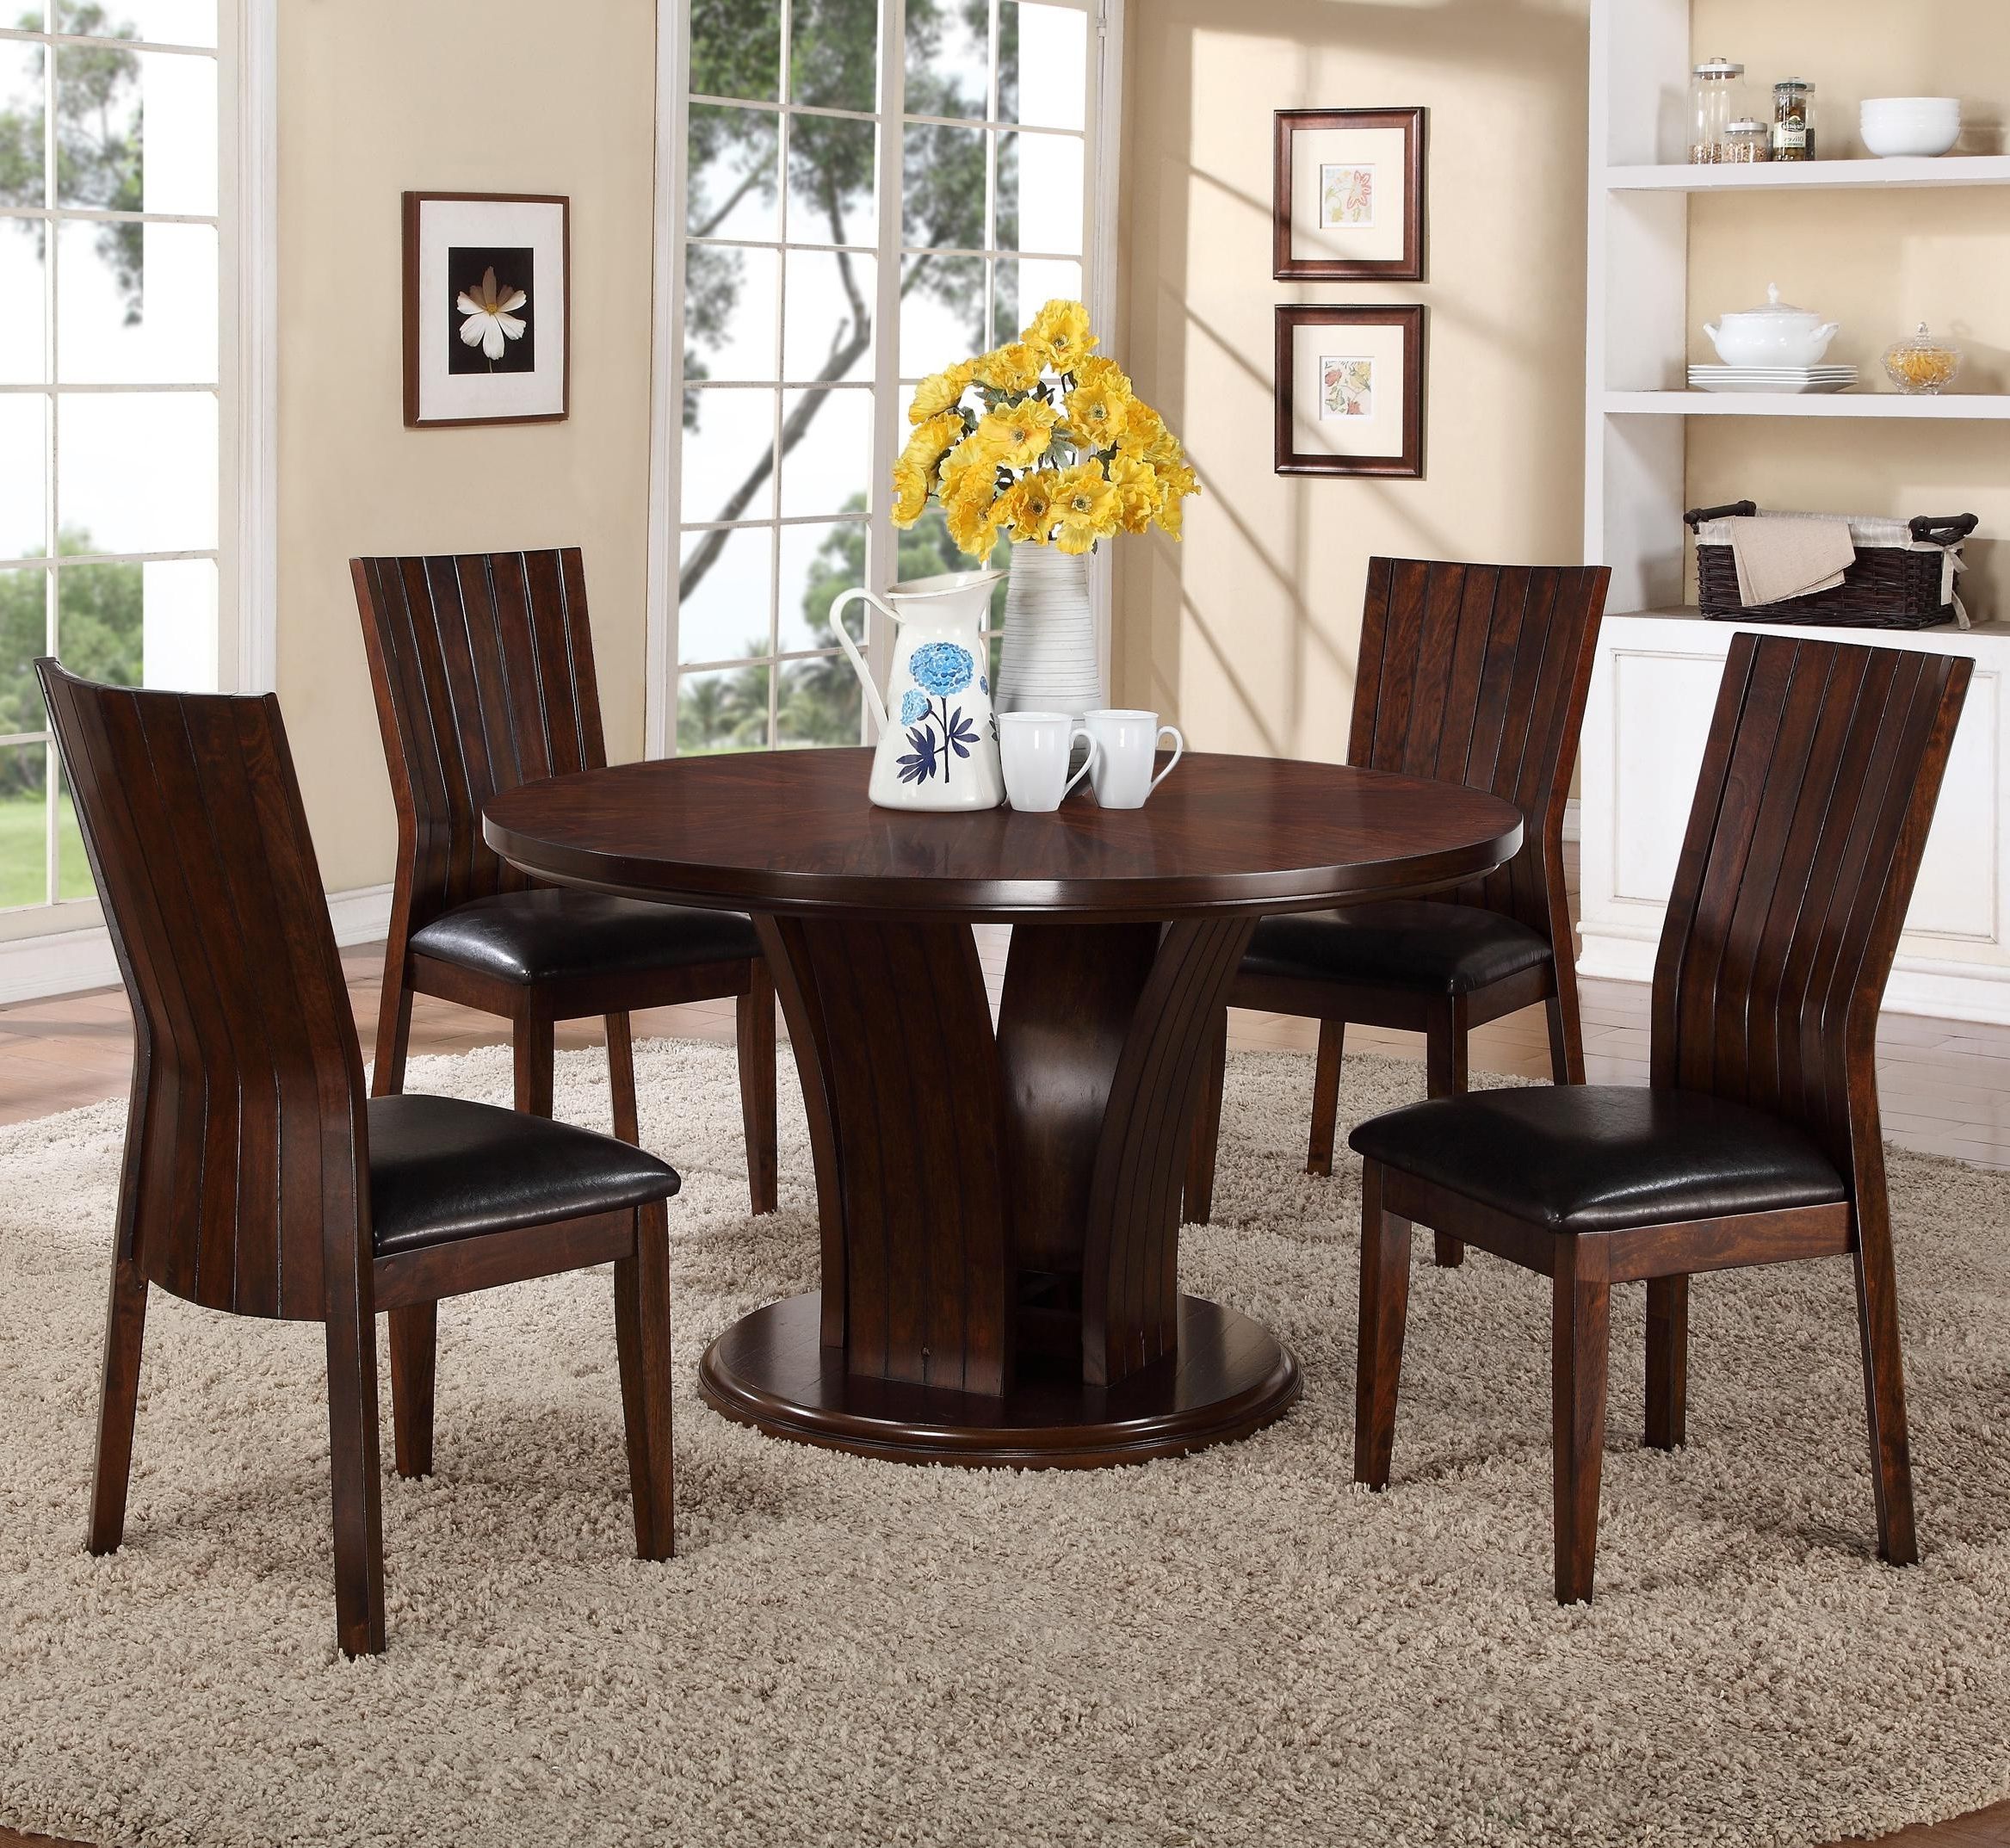 Fashionable Crown Mark Daria 5 Piece Dining Set With Round Pedestal Table And Throughout Jaxon 5 Piece Round Dining Sets With Upholstered Chairs (View 11 of 25)